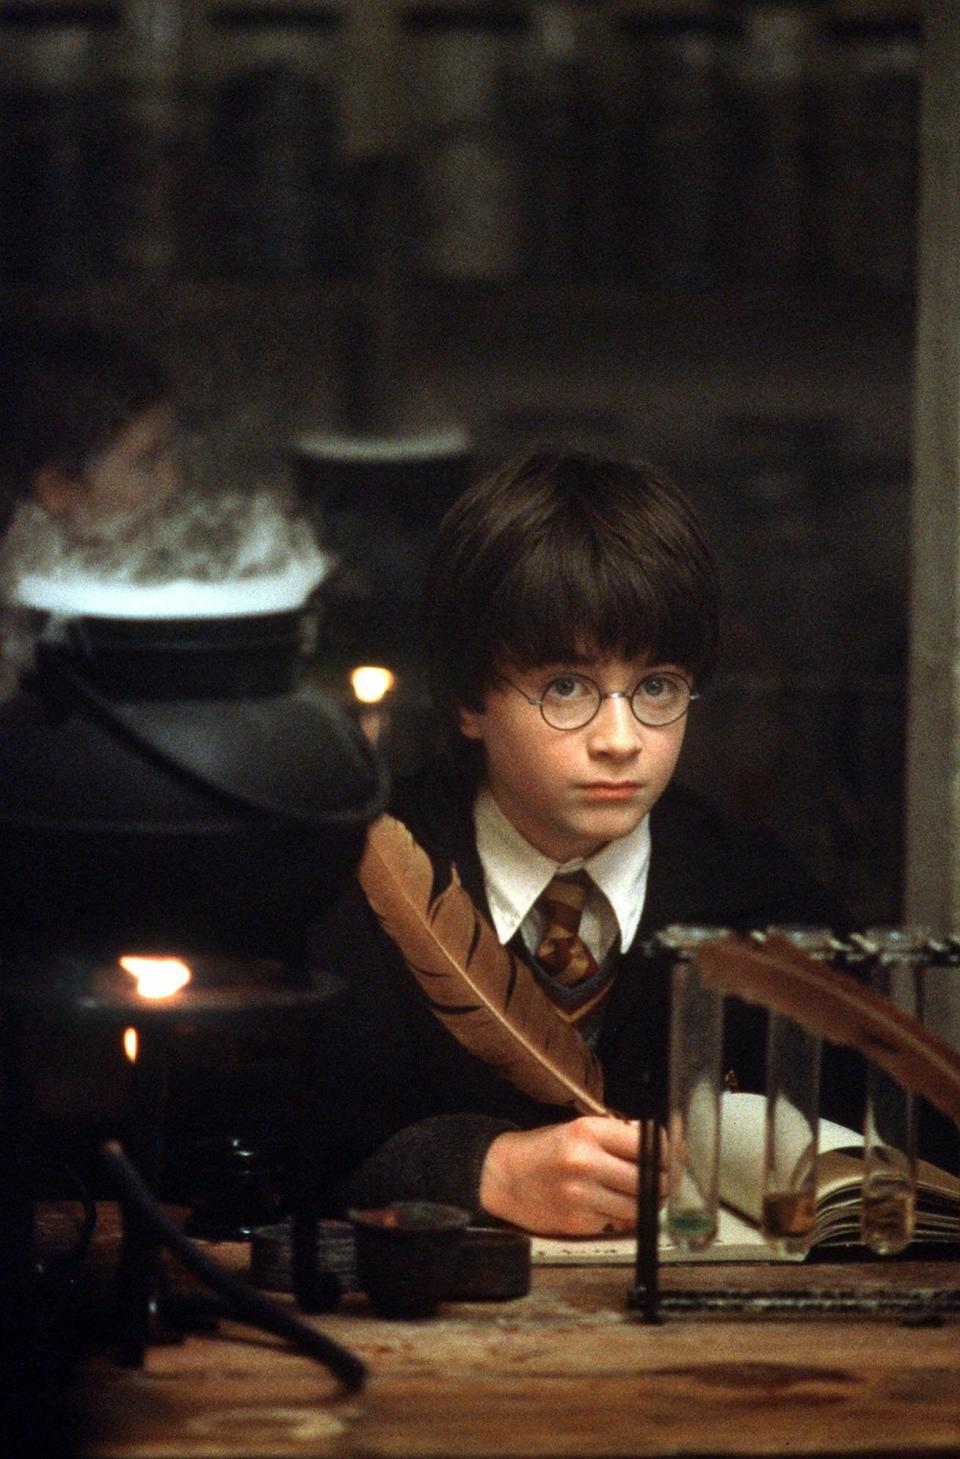 "Harry Potter and the Sorcerer's Stone" will be shown on a 40-foot screen as the Weidner Philharmonic plays the movie's entire score Feb. 16 and 17 at The Weidner